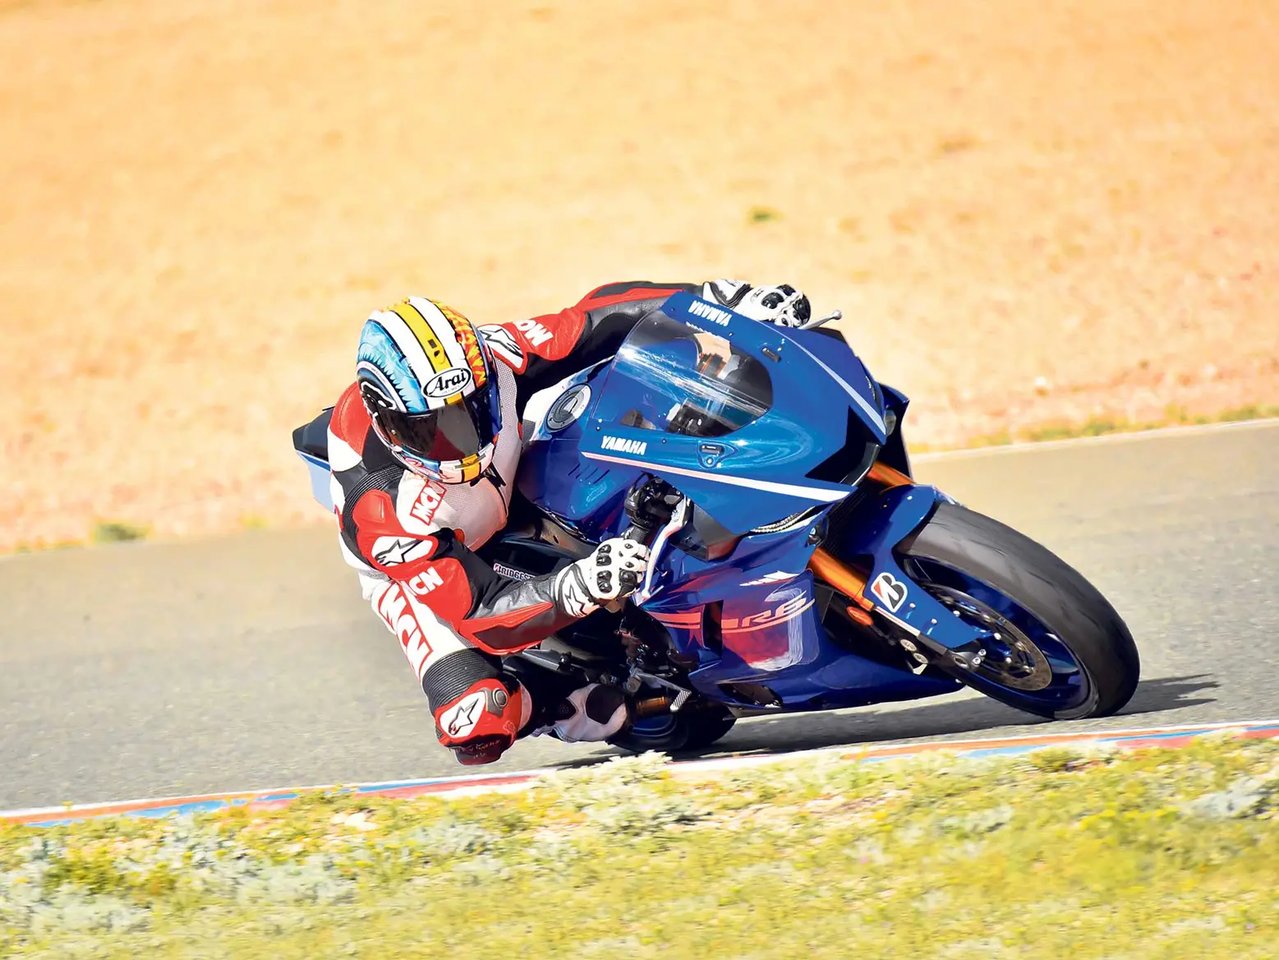 Rider in full gear expertly leaning on a high-speed street bike during a dynamic turn